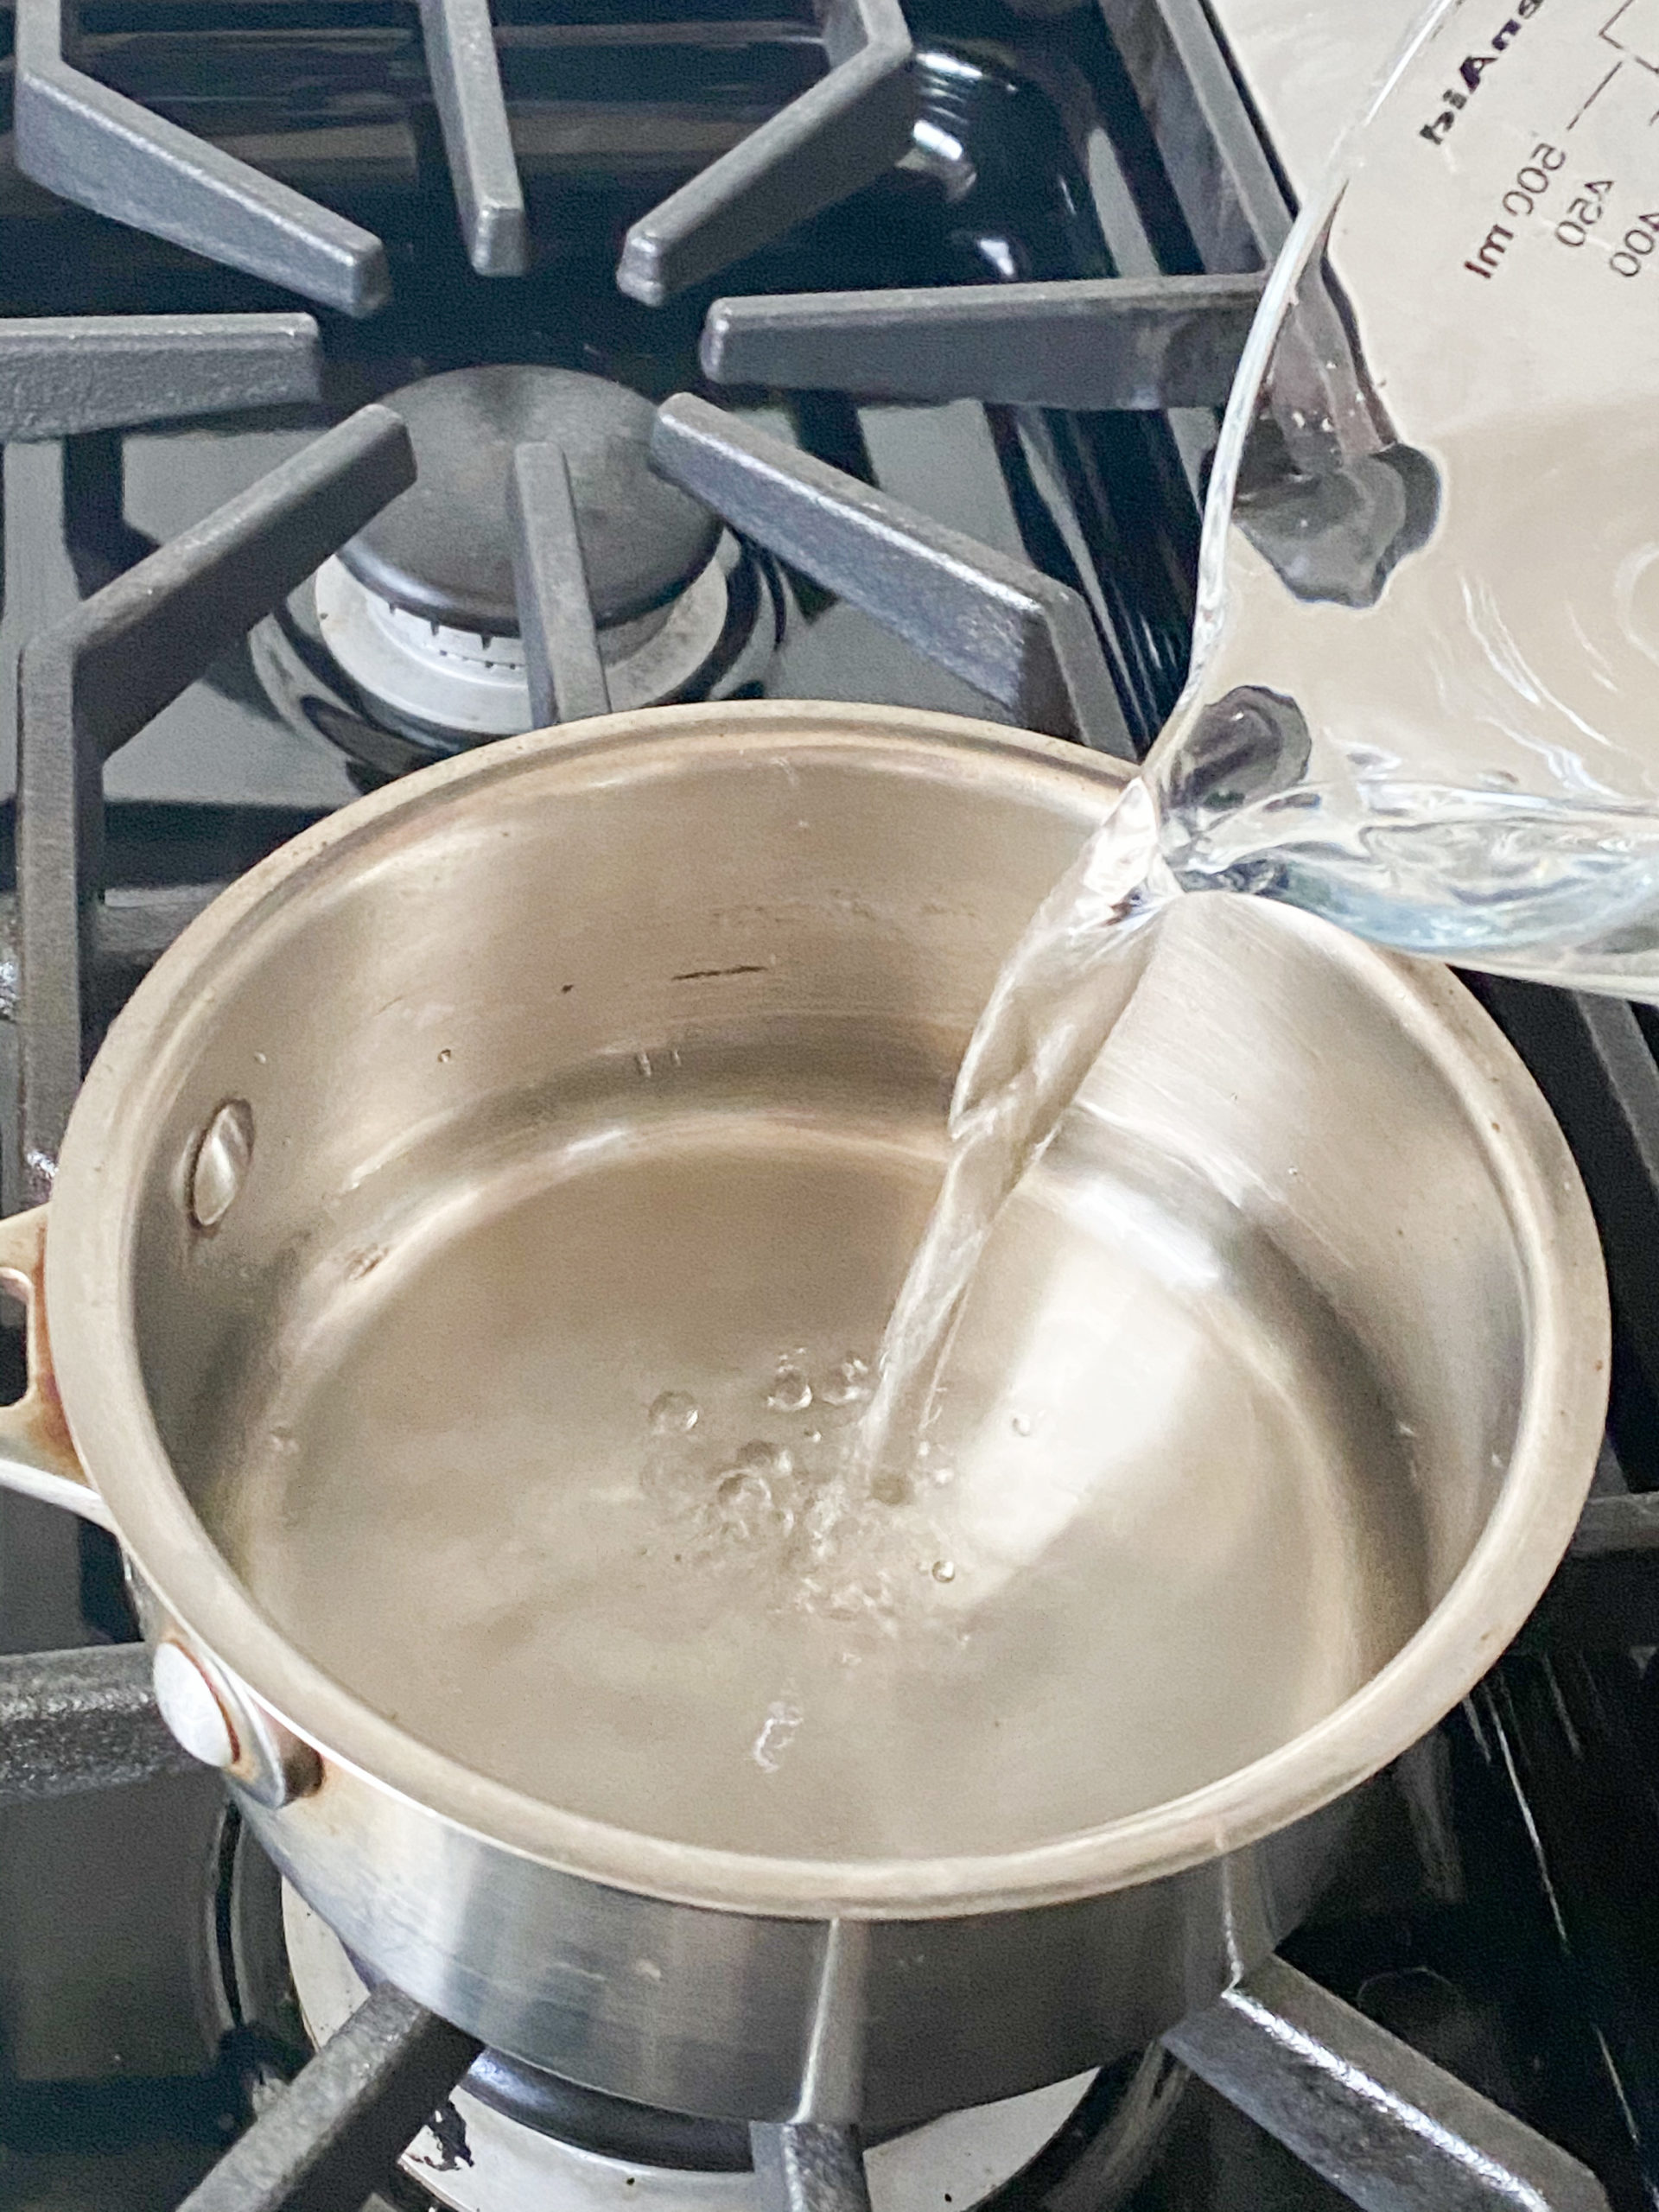 water being added to a sauce pan